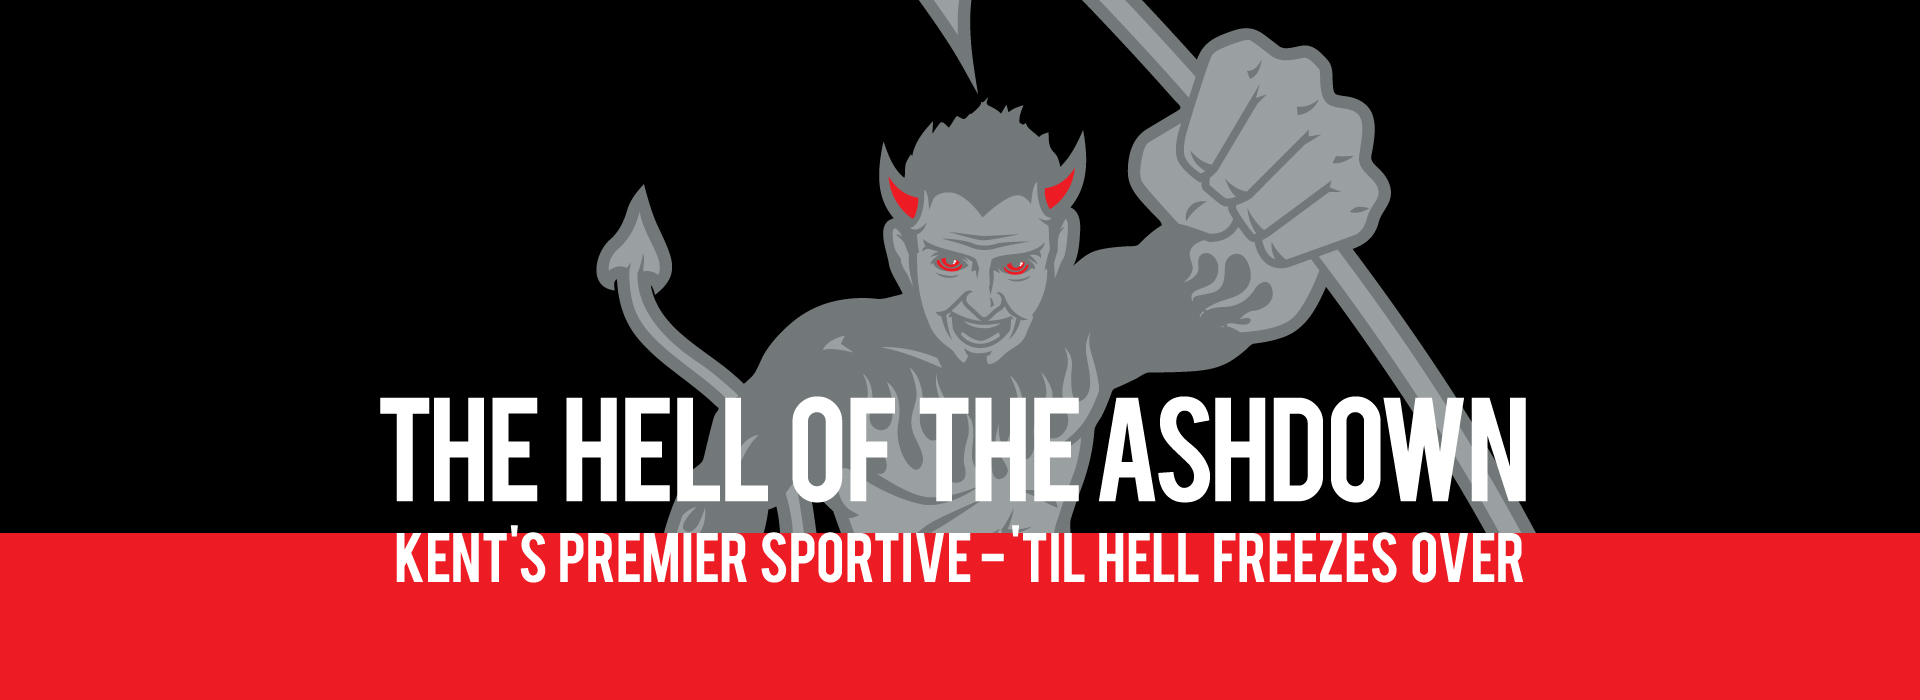 Hell Of The Ashdown